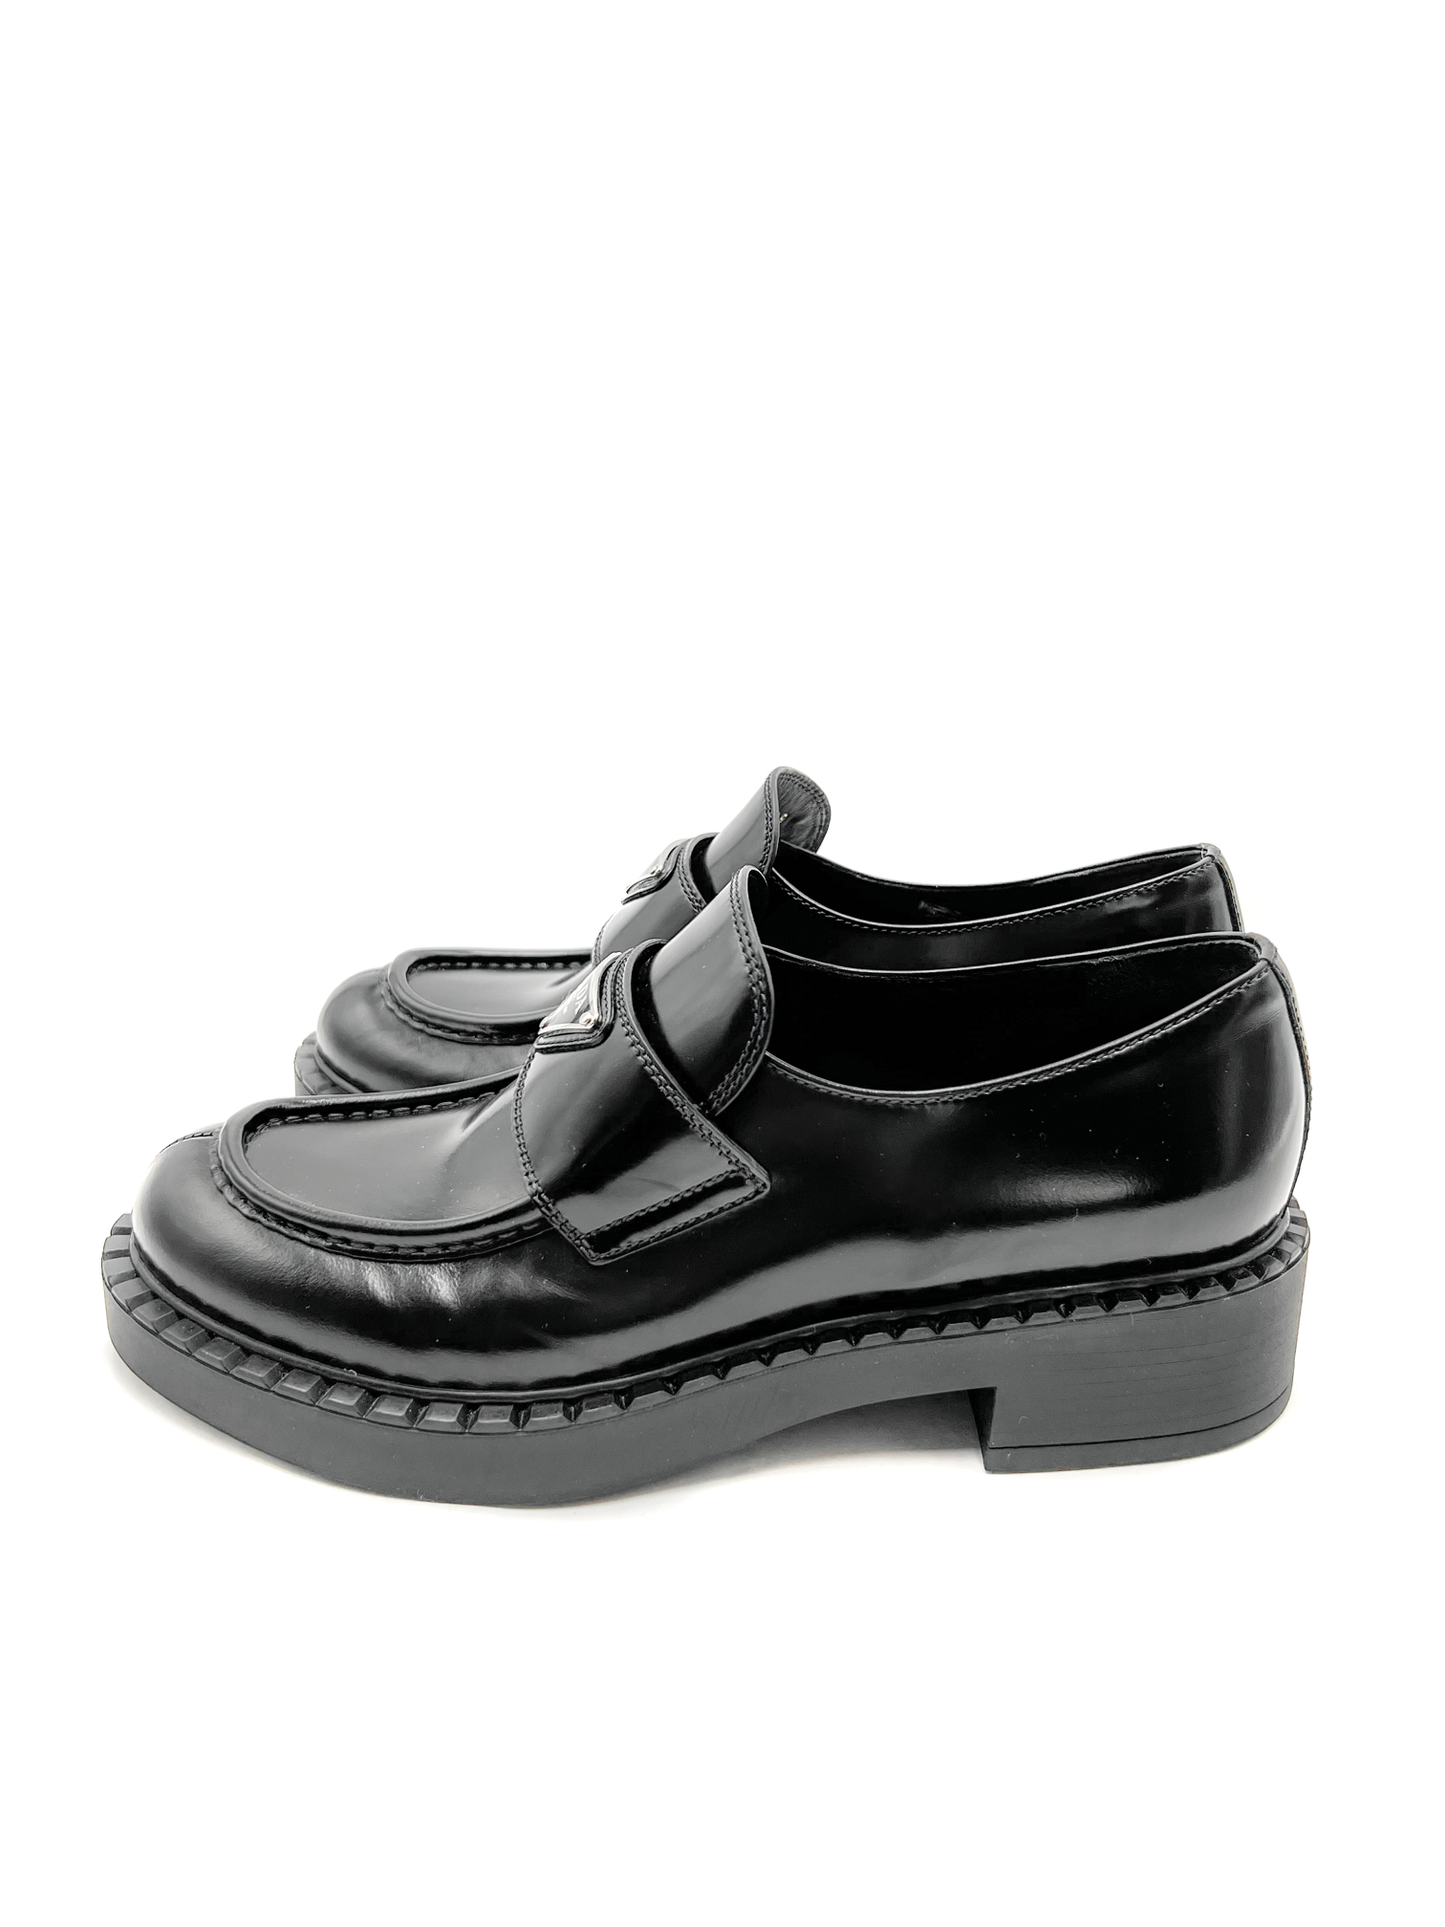 Prada Brushed Leather Monolith Loafers